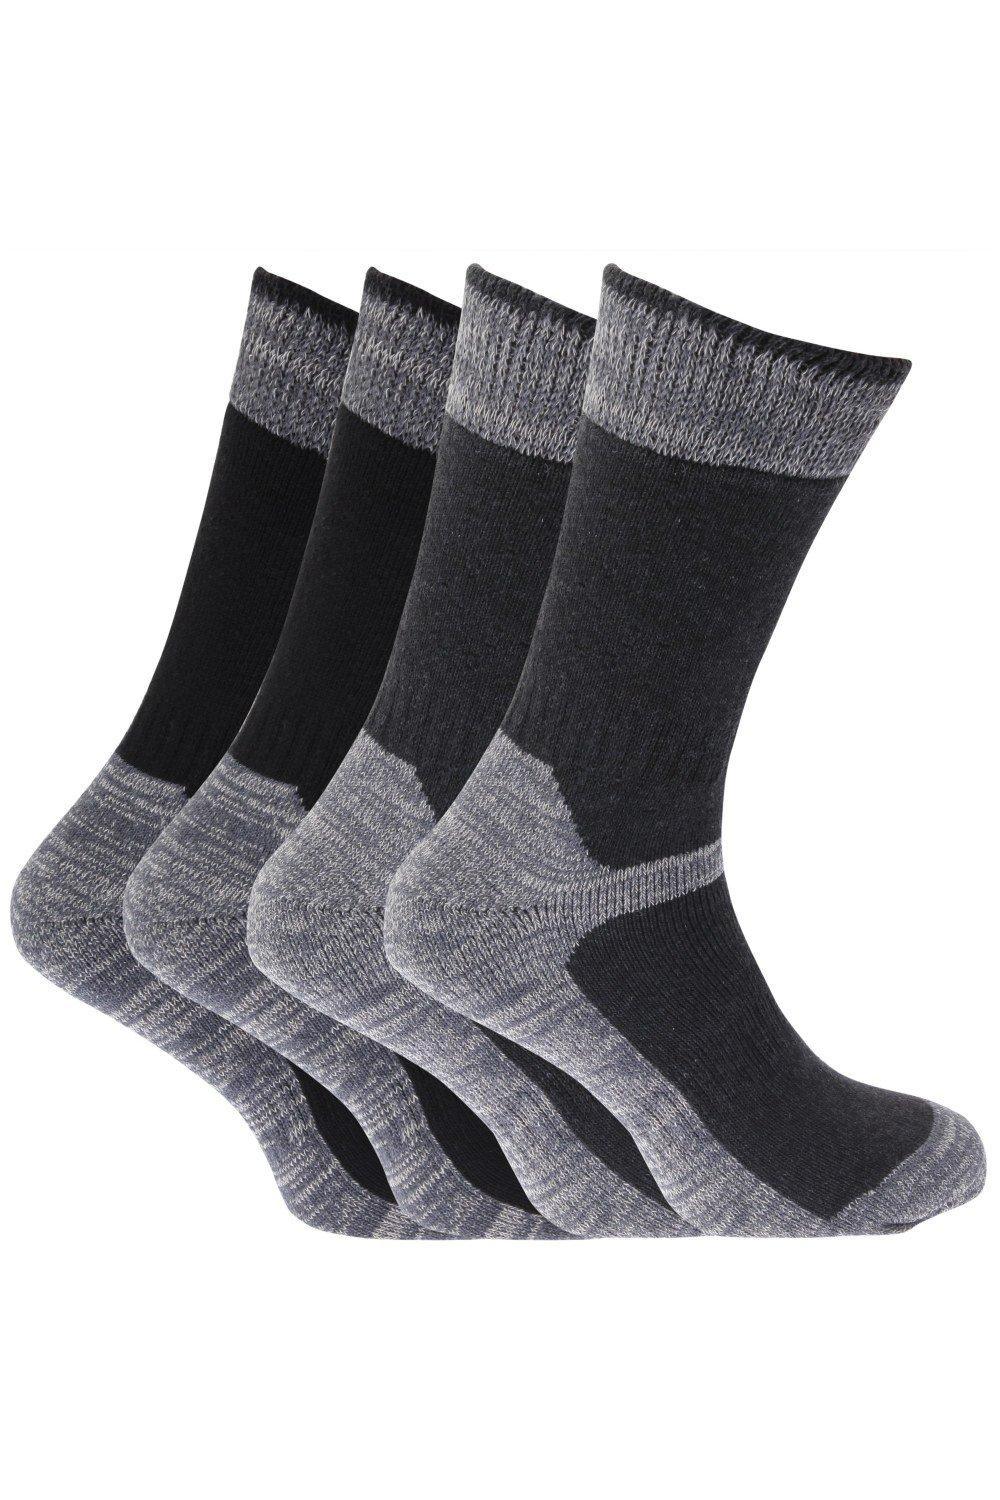 Heavy Weight Reinforced Toe Work Boot Socks (Pack Of 4)